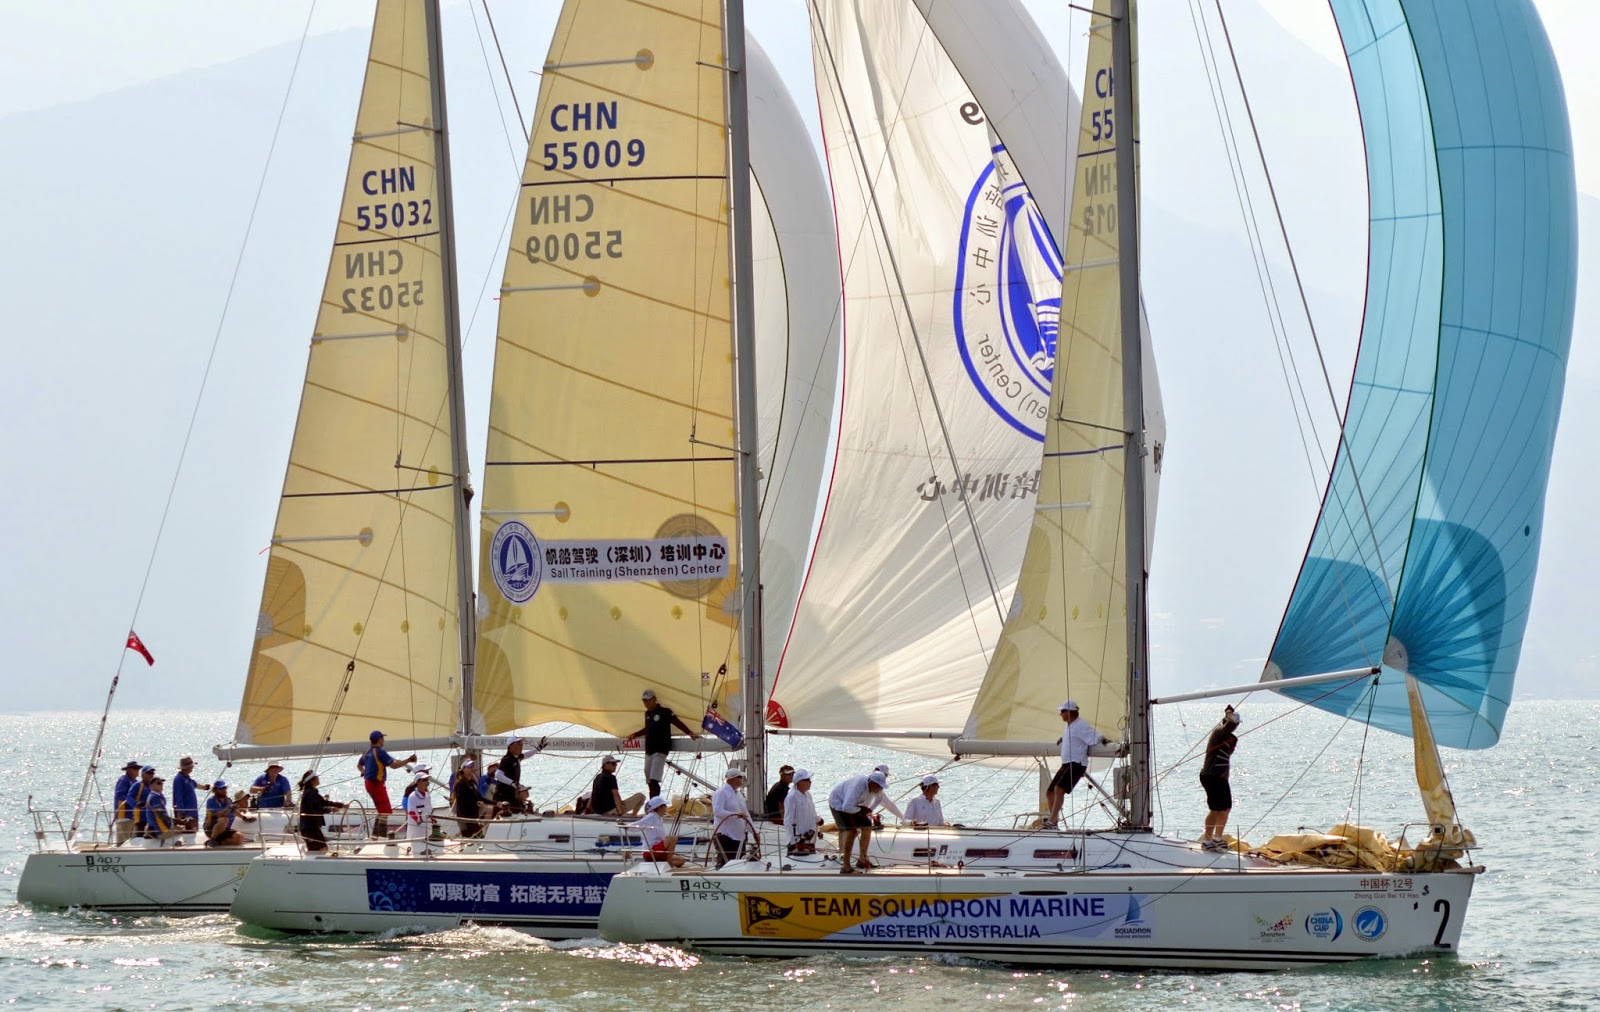 http://asianyachting.com/news/ChinaCup14/China_Cup_14_Pre-Regatta_Report.htm